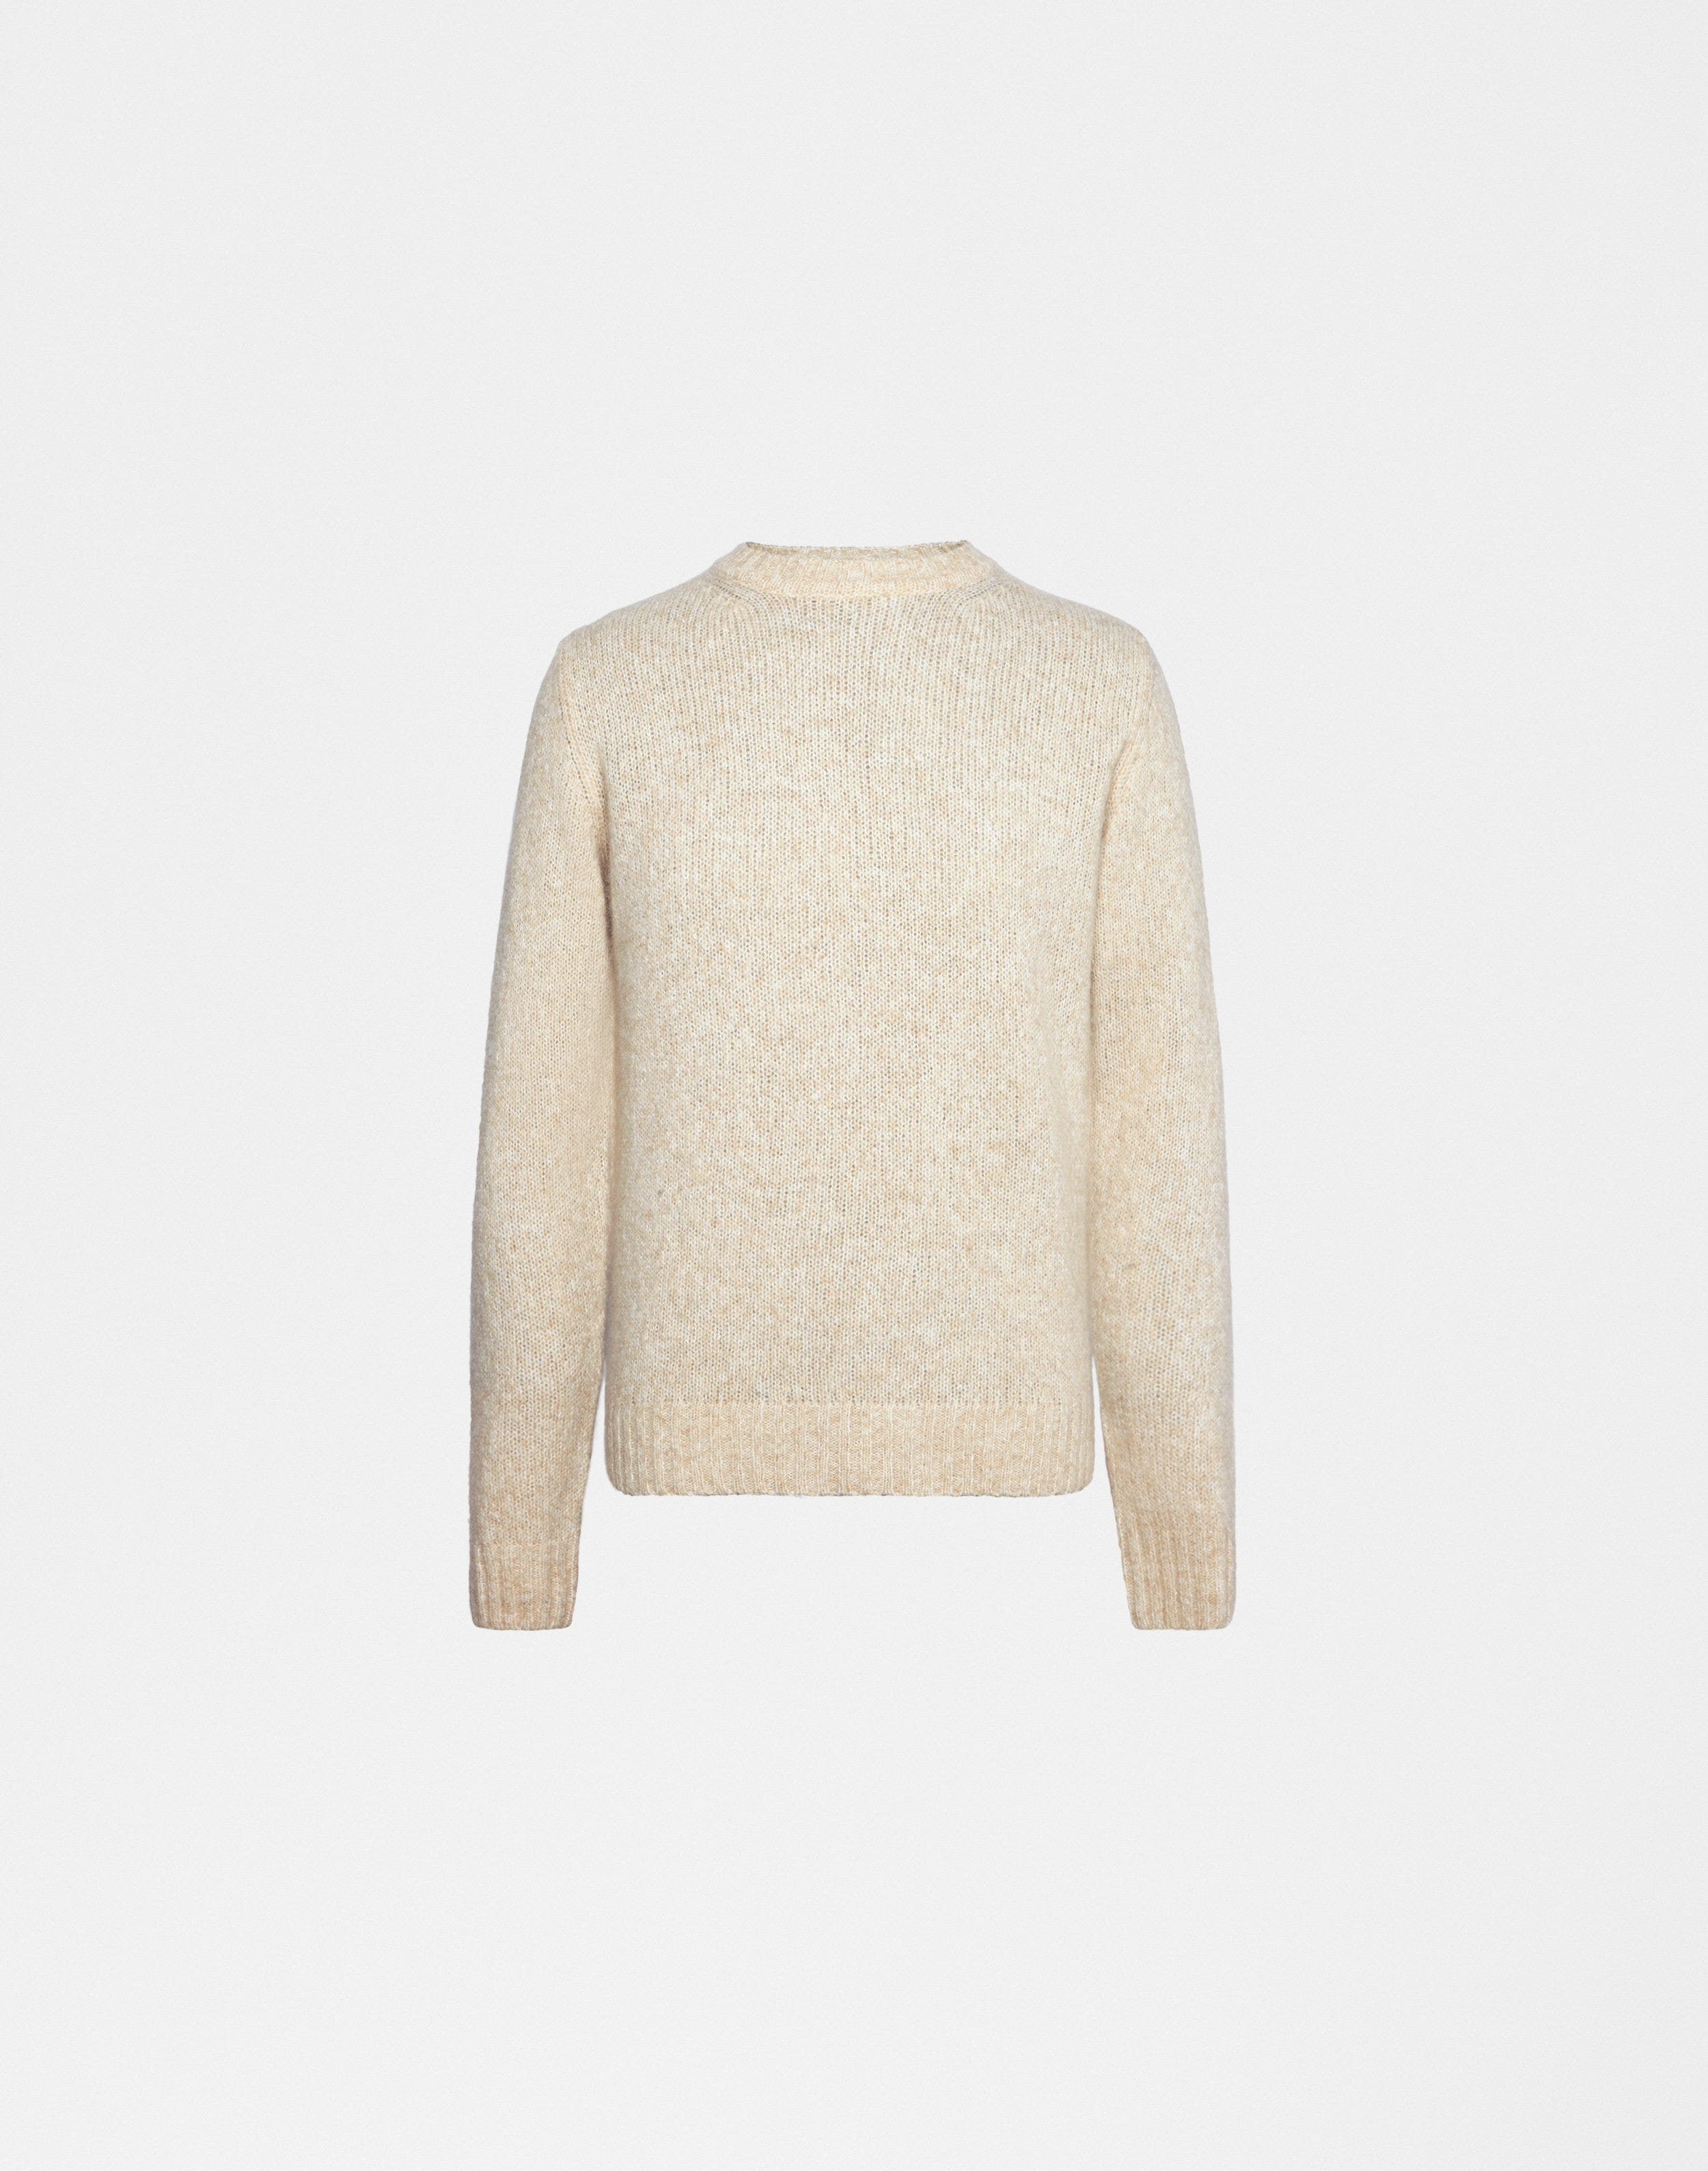 Beige and cream crew neck pullover with long sleeves